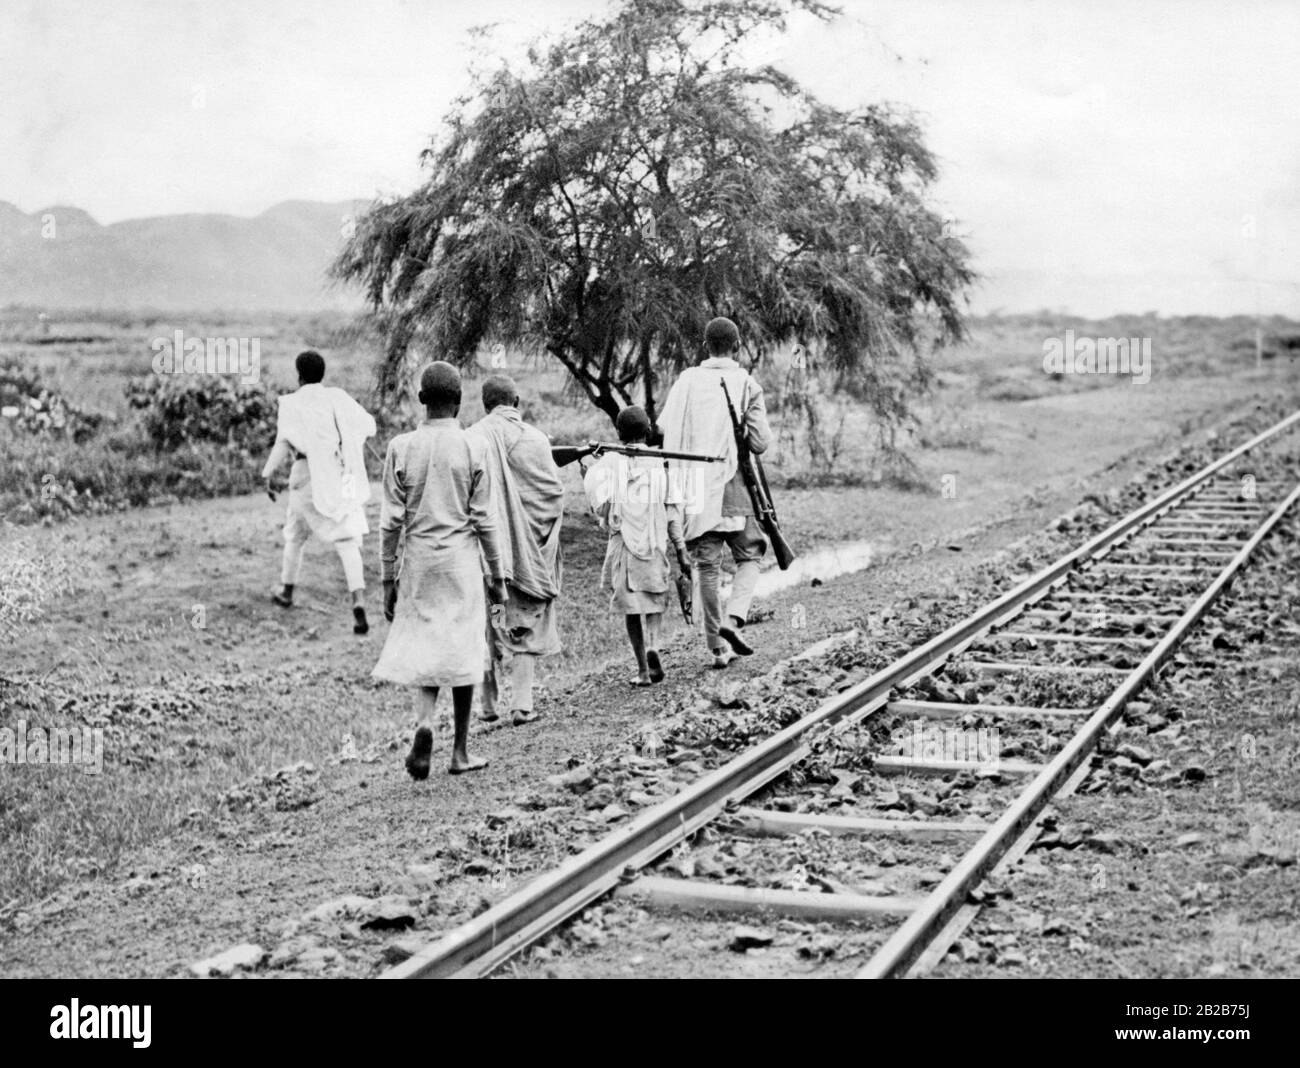 Ethiopian recruits on their way to the assembly place Harar in today's Ethiopia, from where they will go together to the Ogaden front against the Italians. The majority of the Abyssinian soldiers were between 12 and 20 years old. Stock Photo